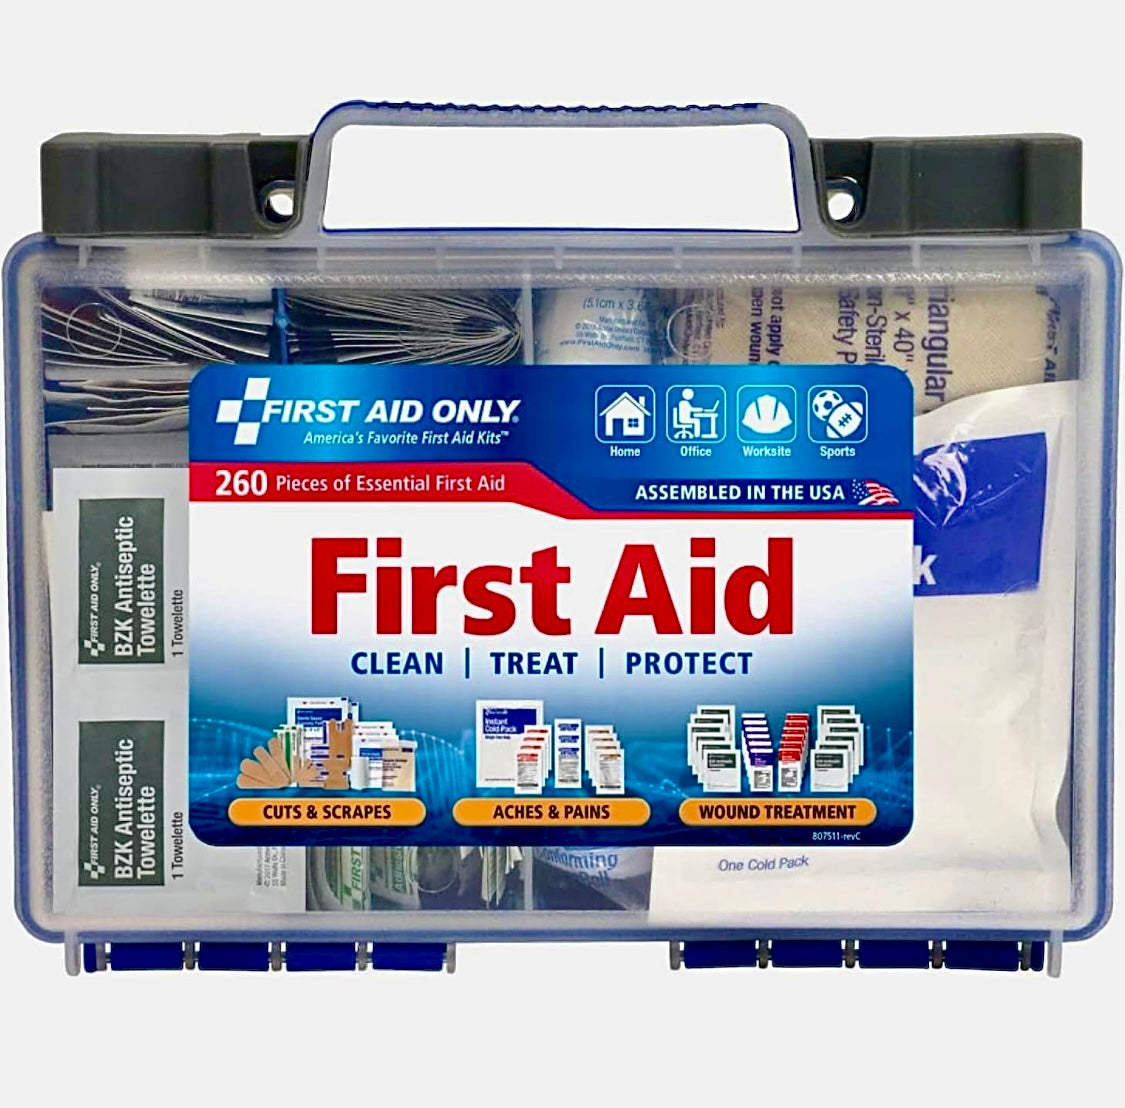 First Aid Kit OSHA-Compliant All-Purpose Emergency for Home, Work, and Travel, 260 Pieces